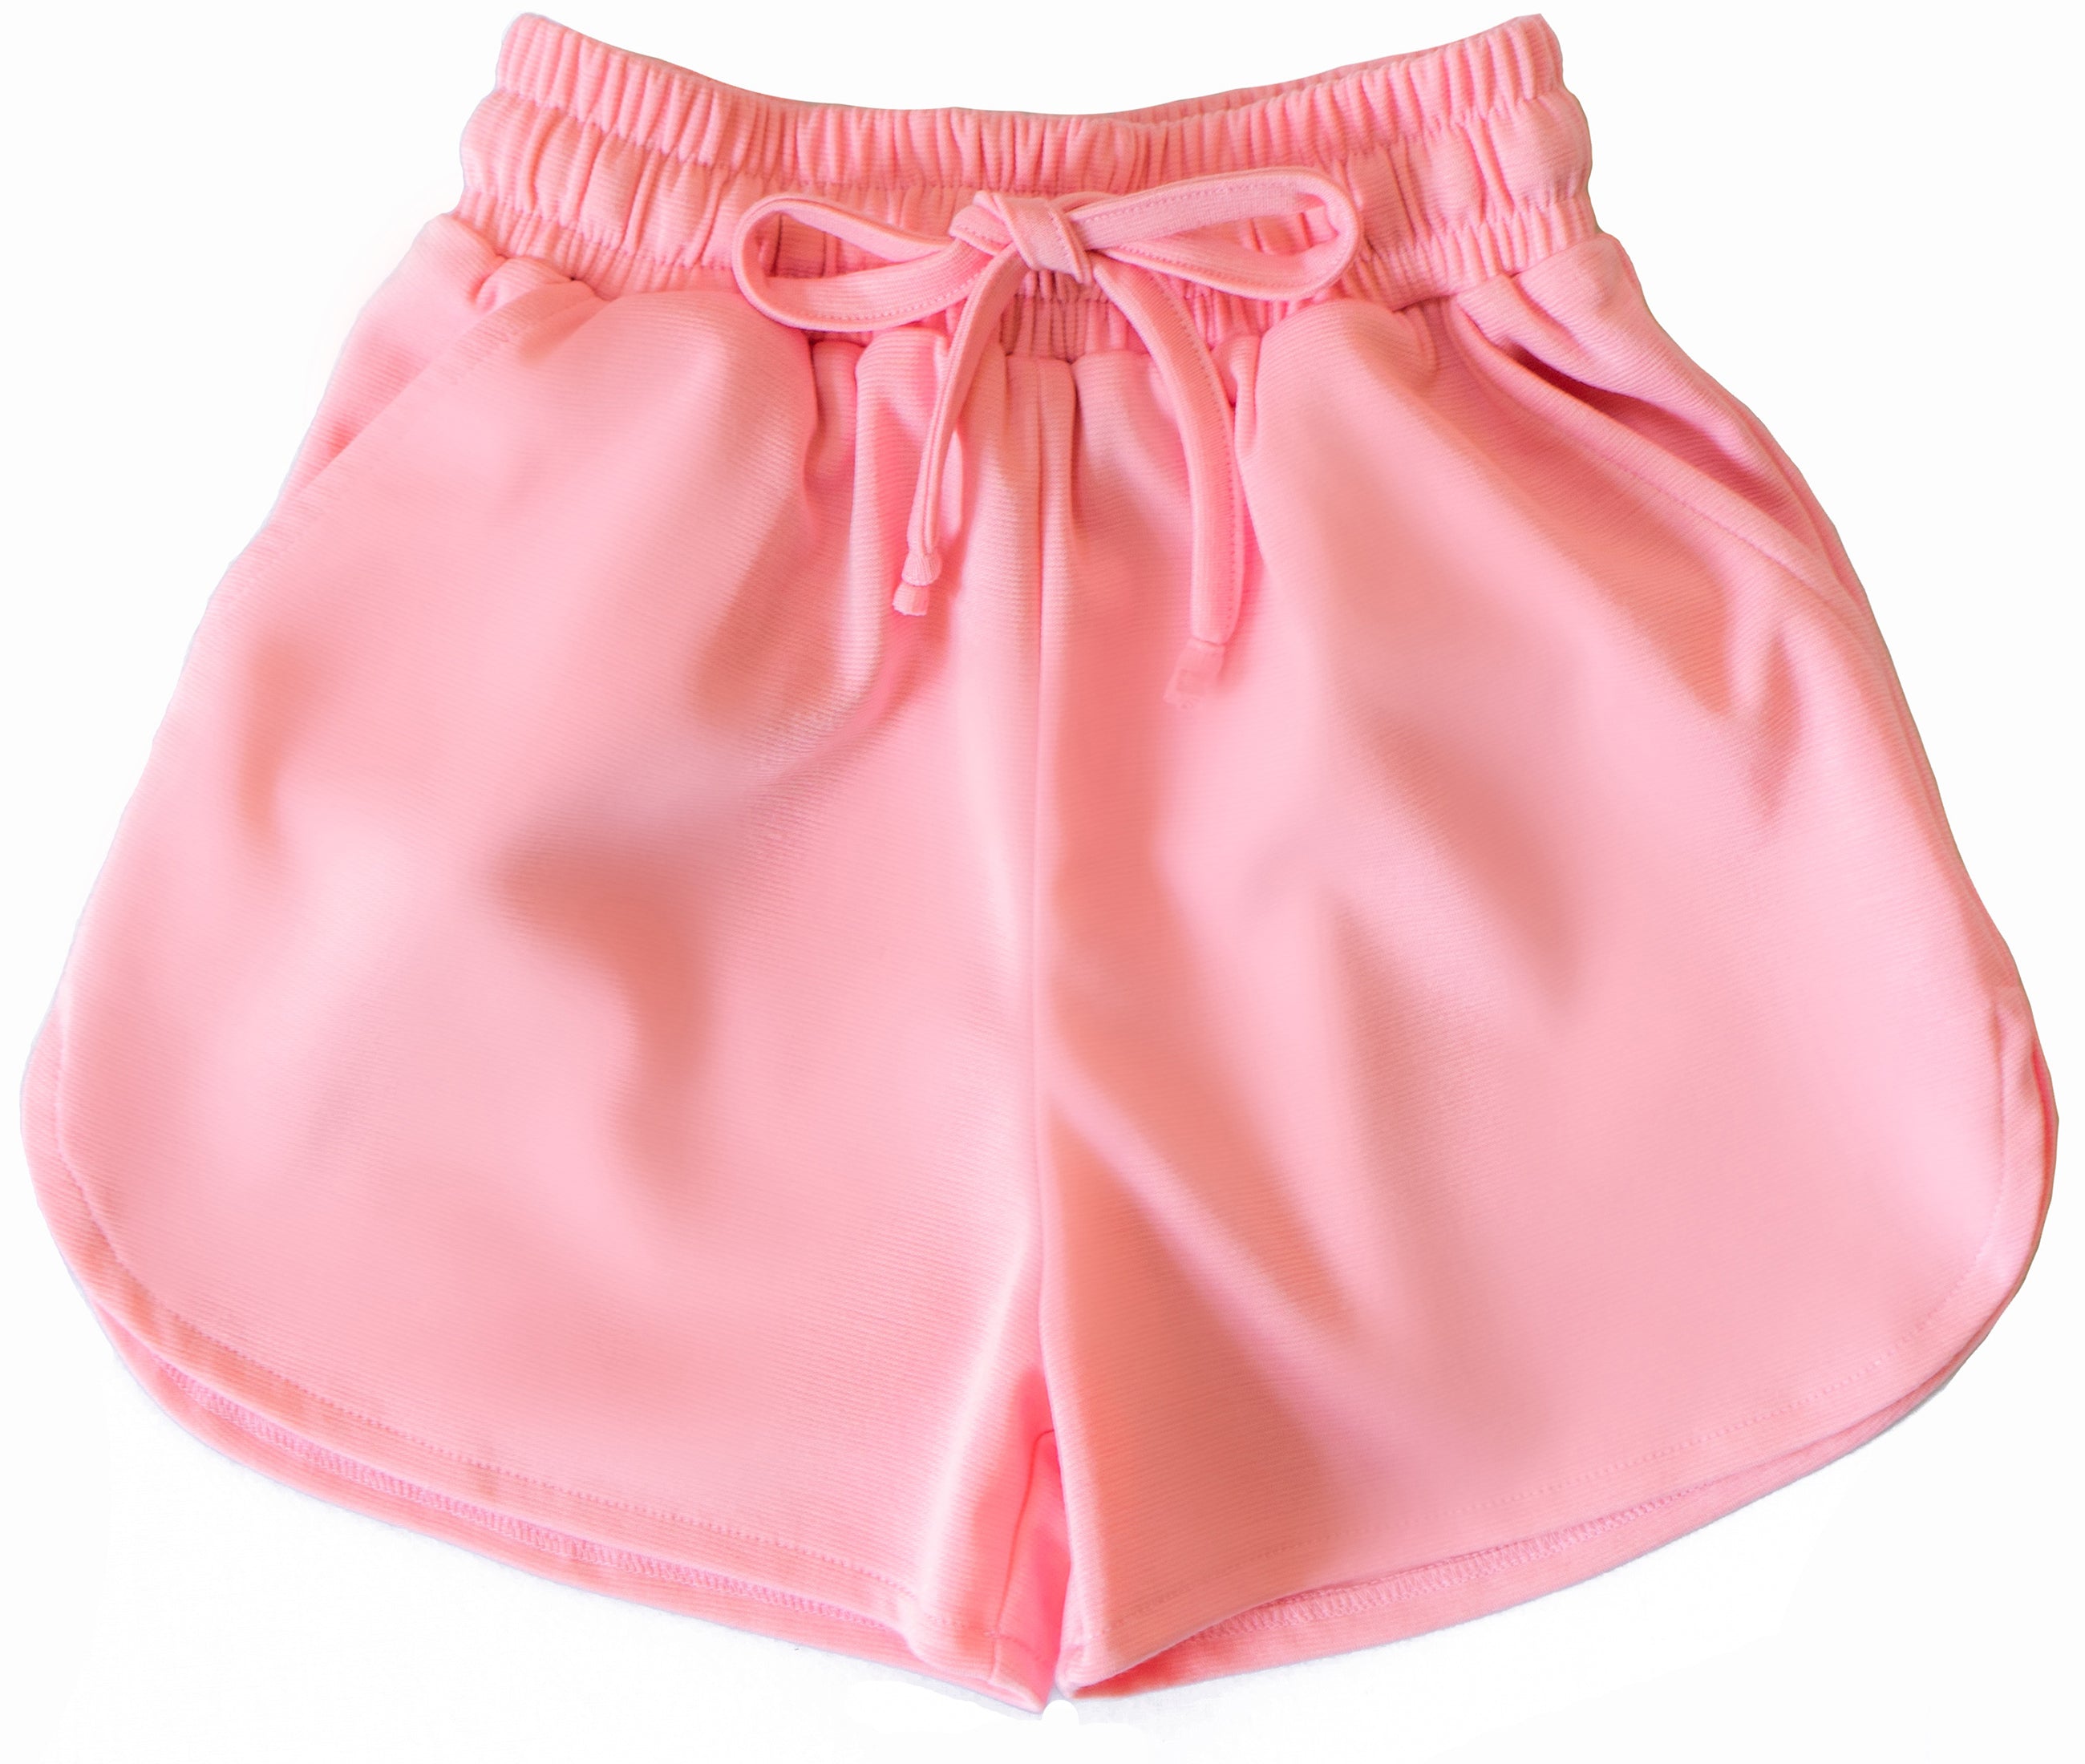 Pink Jogger Style Short